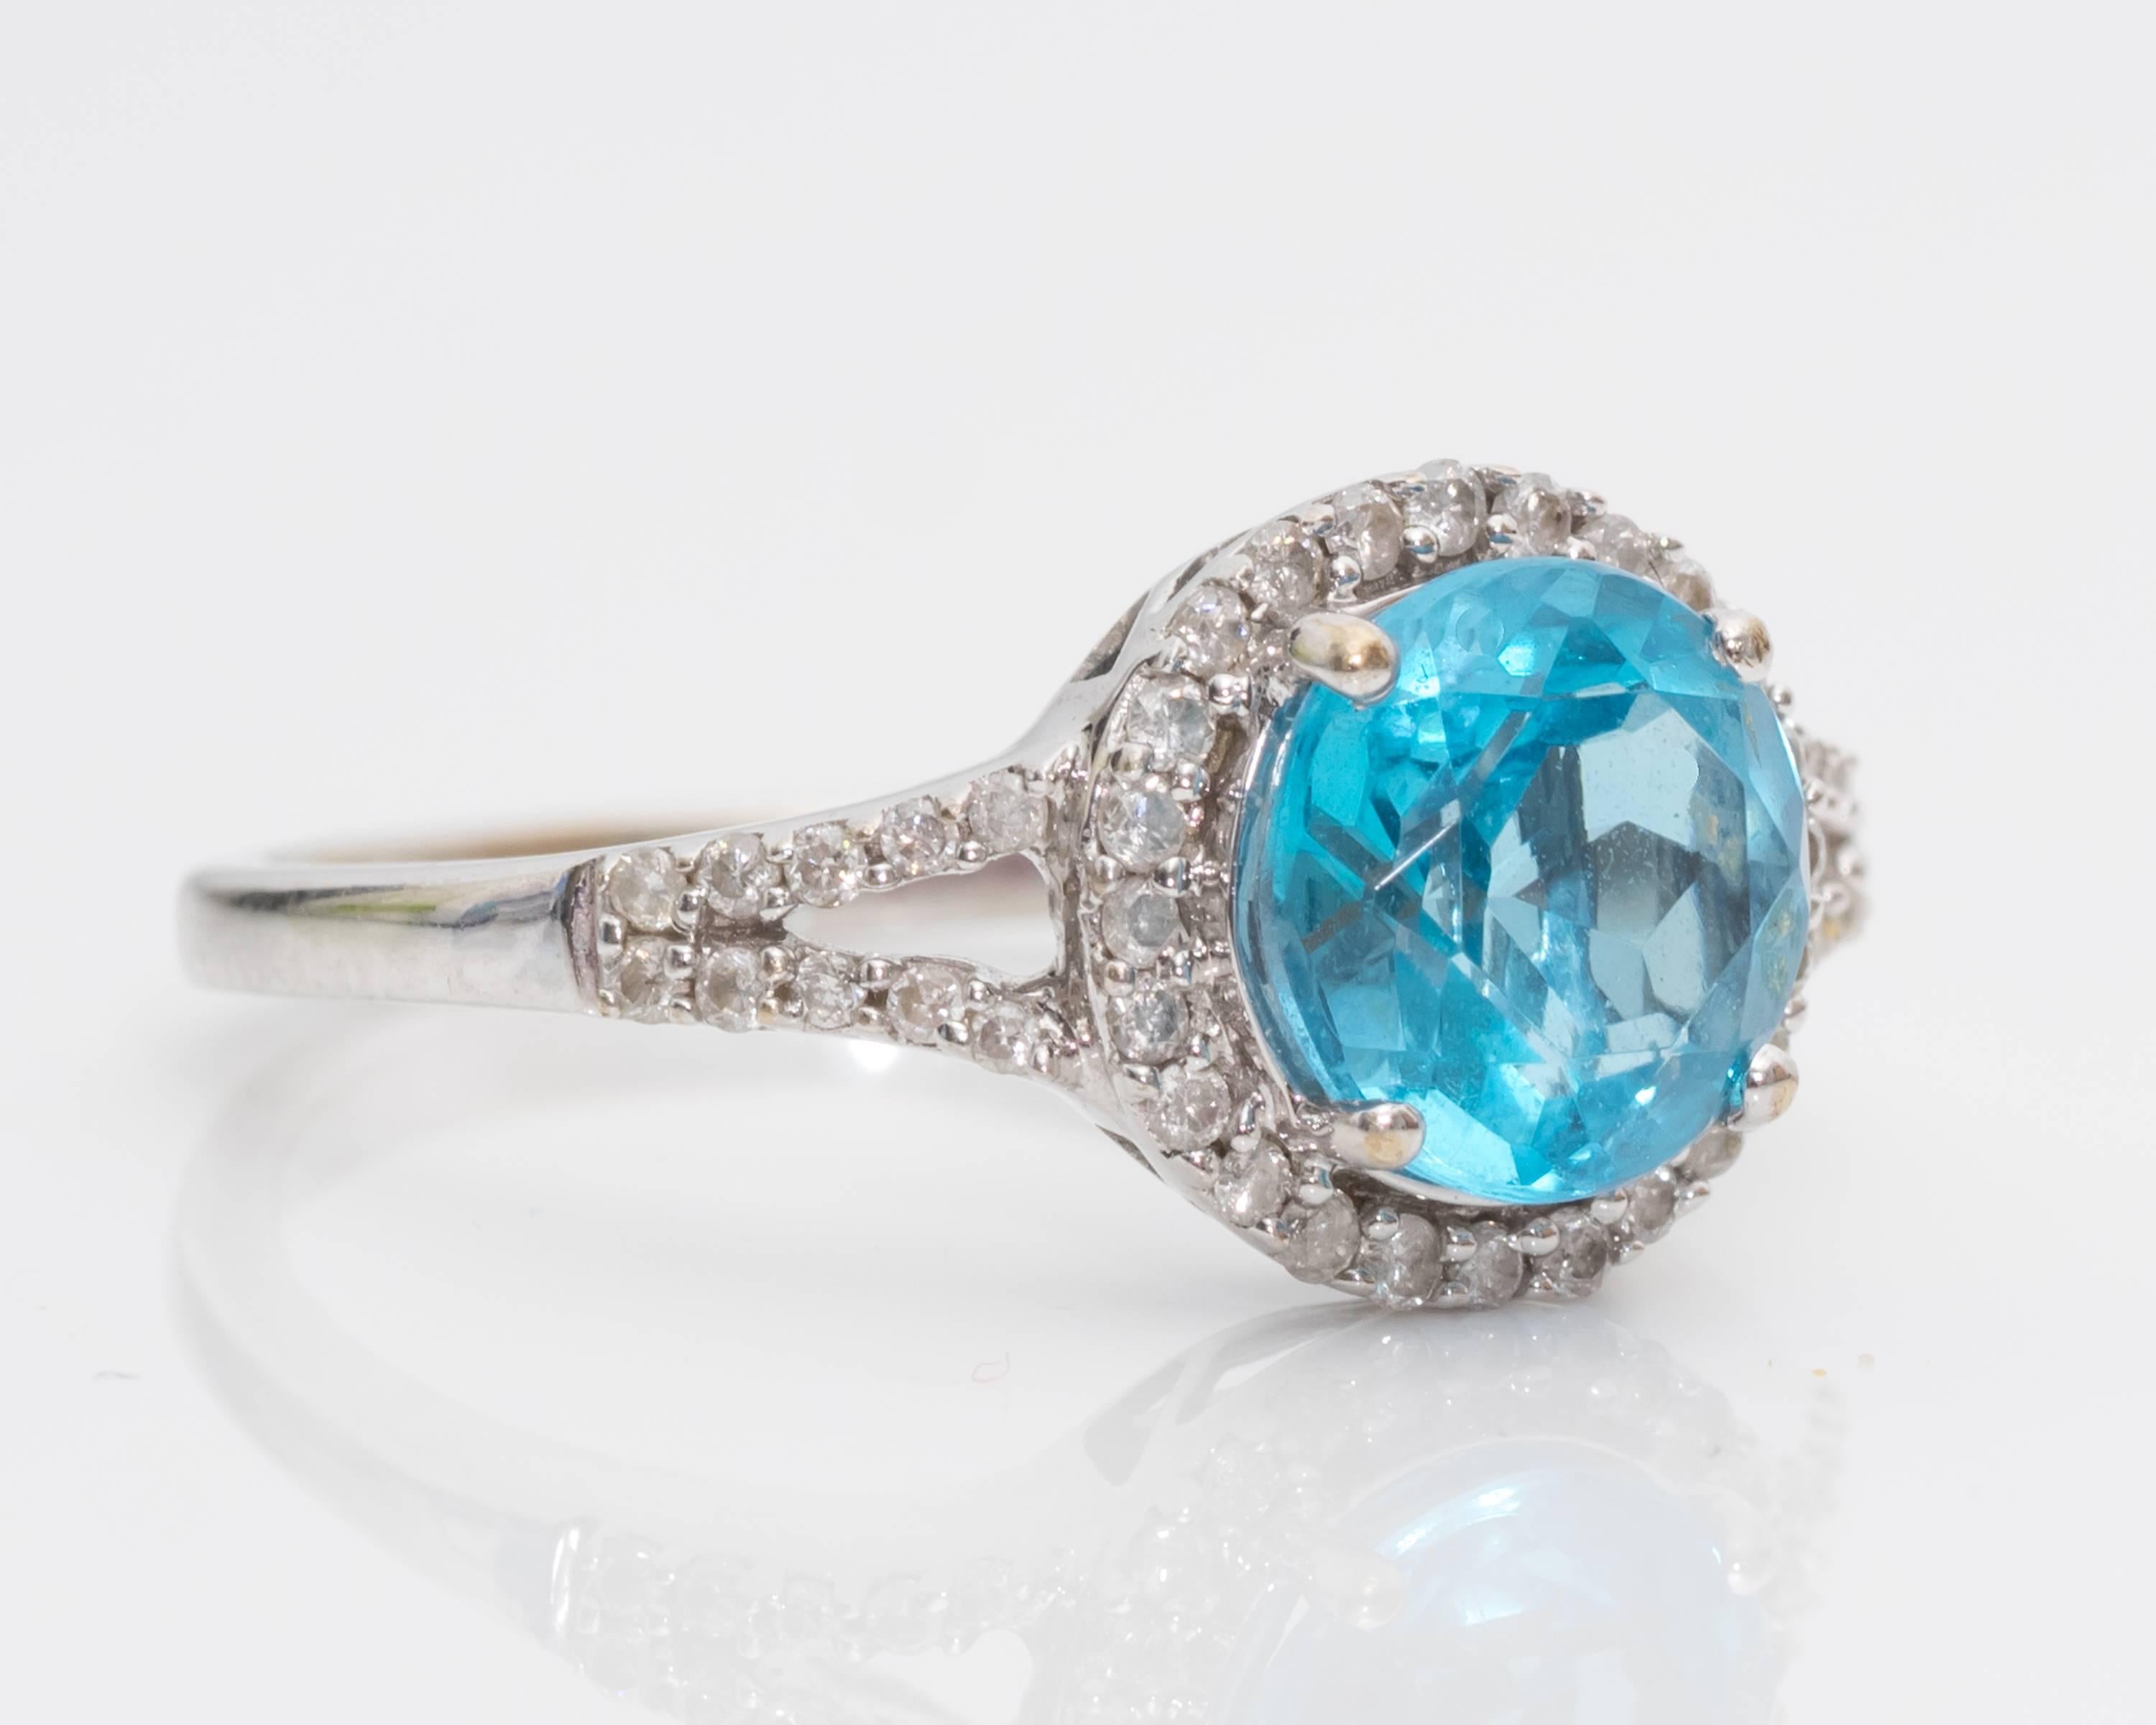 Blue Topaz and Diamond Halo Ring - 14 Karat White Gold, Blue Topaz, Diamonds

The 1.0 carat round Blue Topaz is surrounded by a Diamond Halo. The split shoulders are diamond encrusted. The setting has an open gallery which amplifies the brilliance